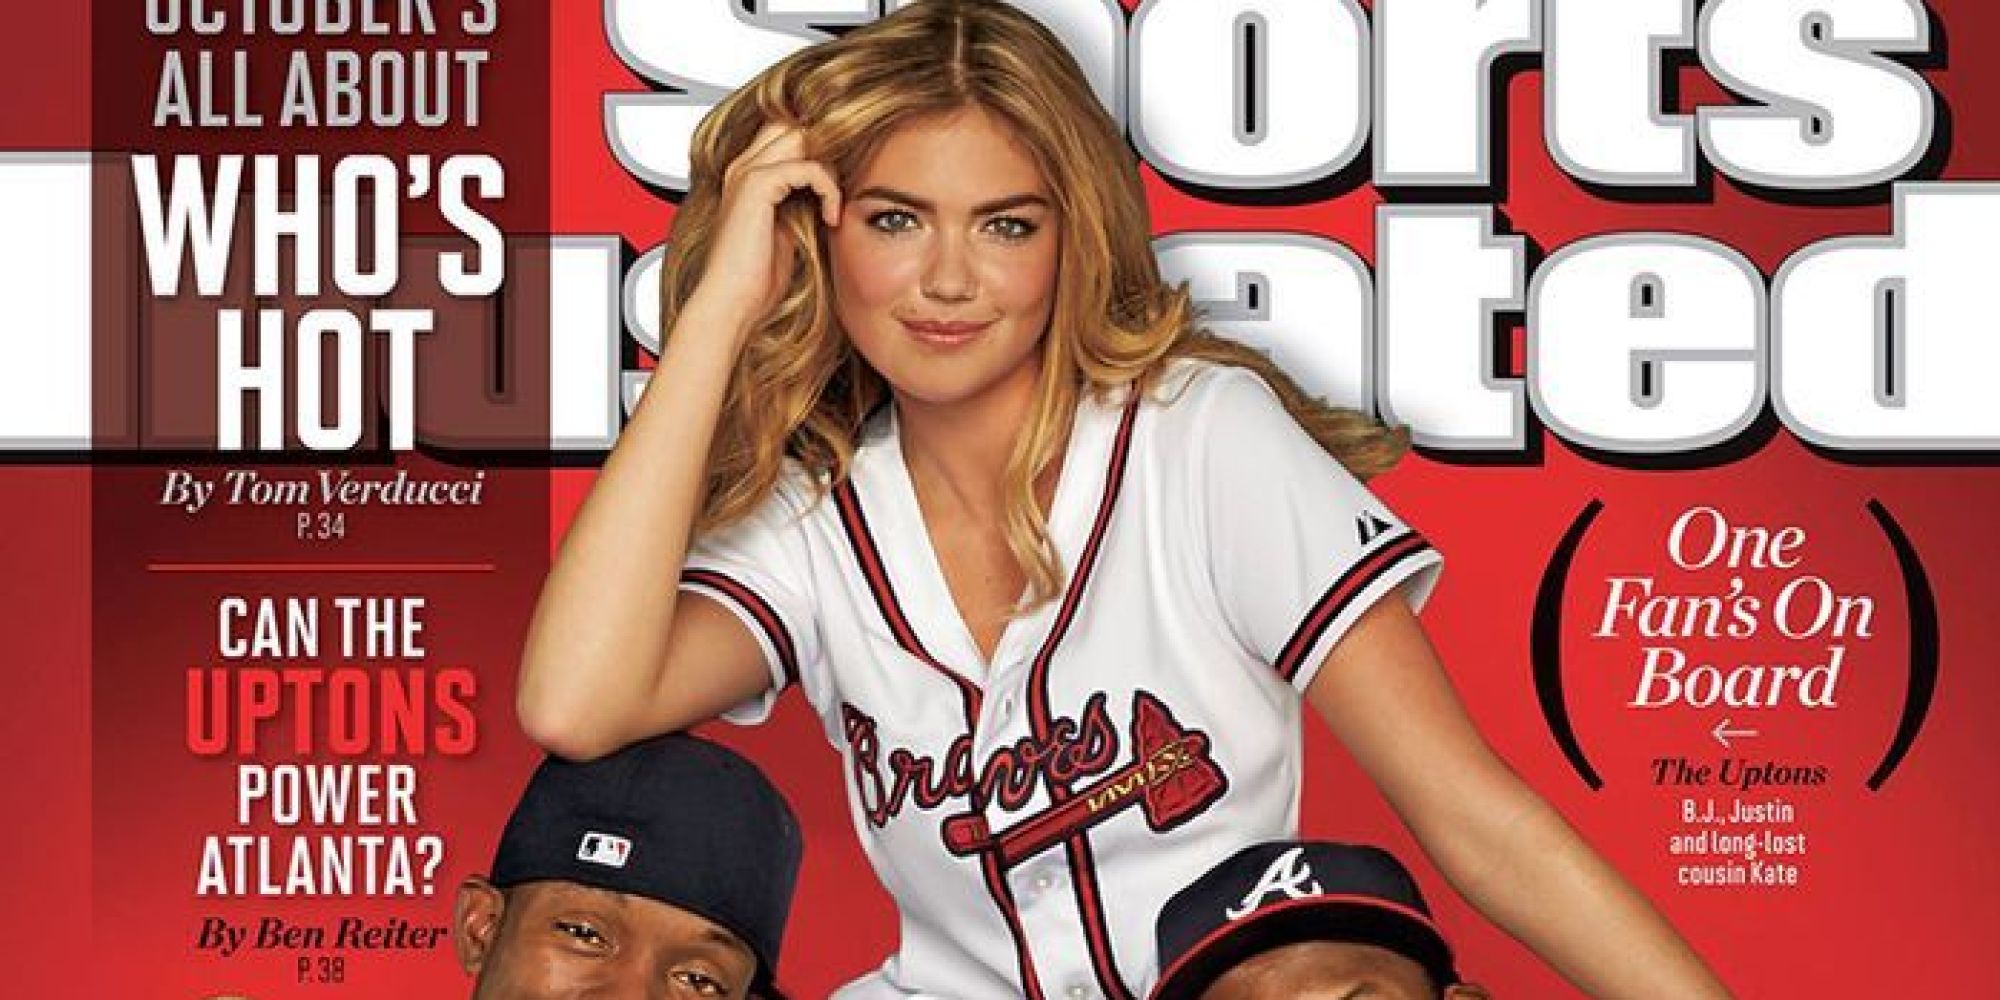 Kate Upton's Latest Sports Illustrated Cover Doesn't Feature A Swimsuit